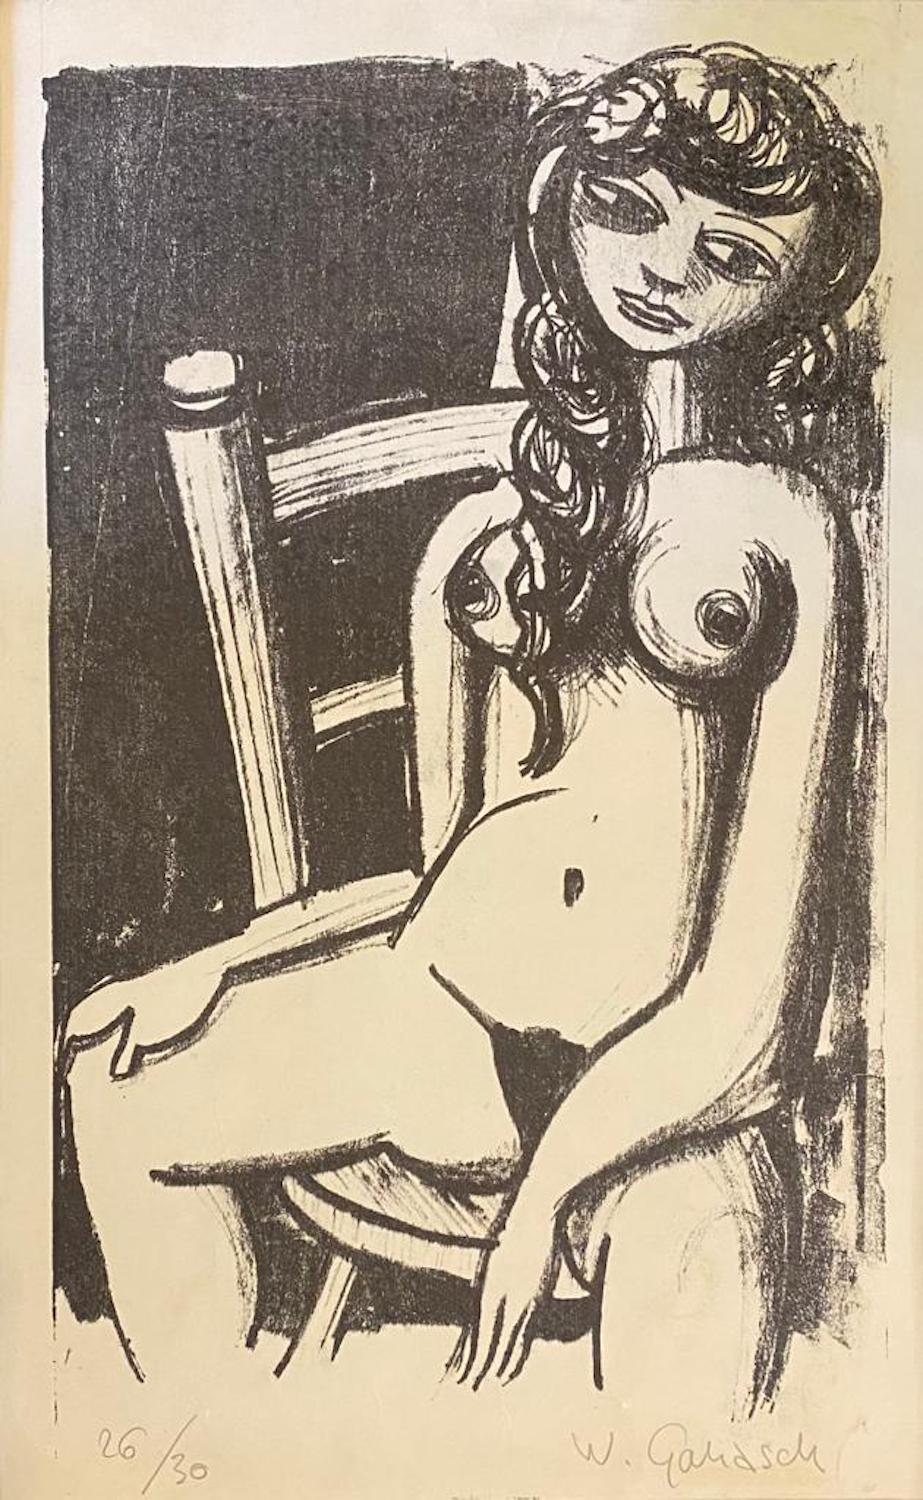 "Young woman posing nude sitting" by William Goliasch - lithograph